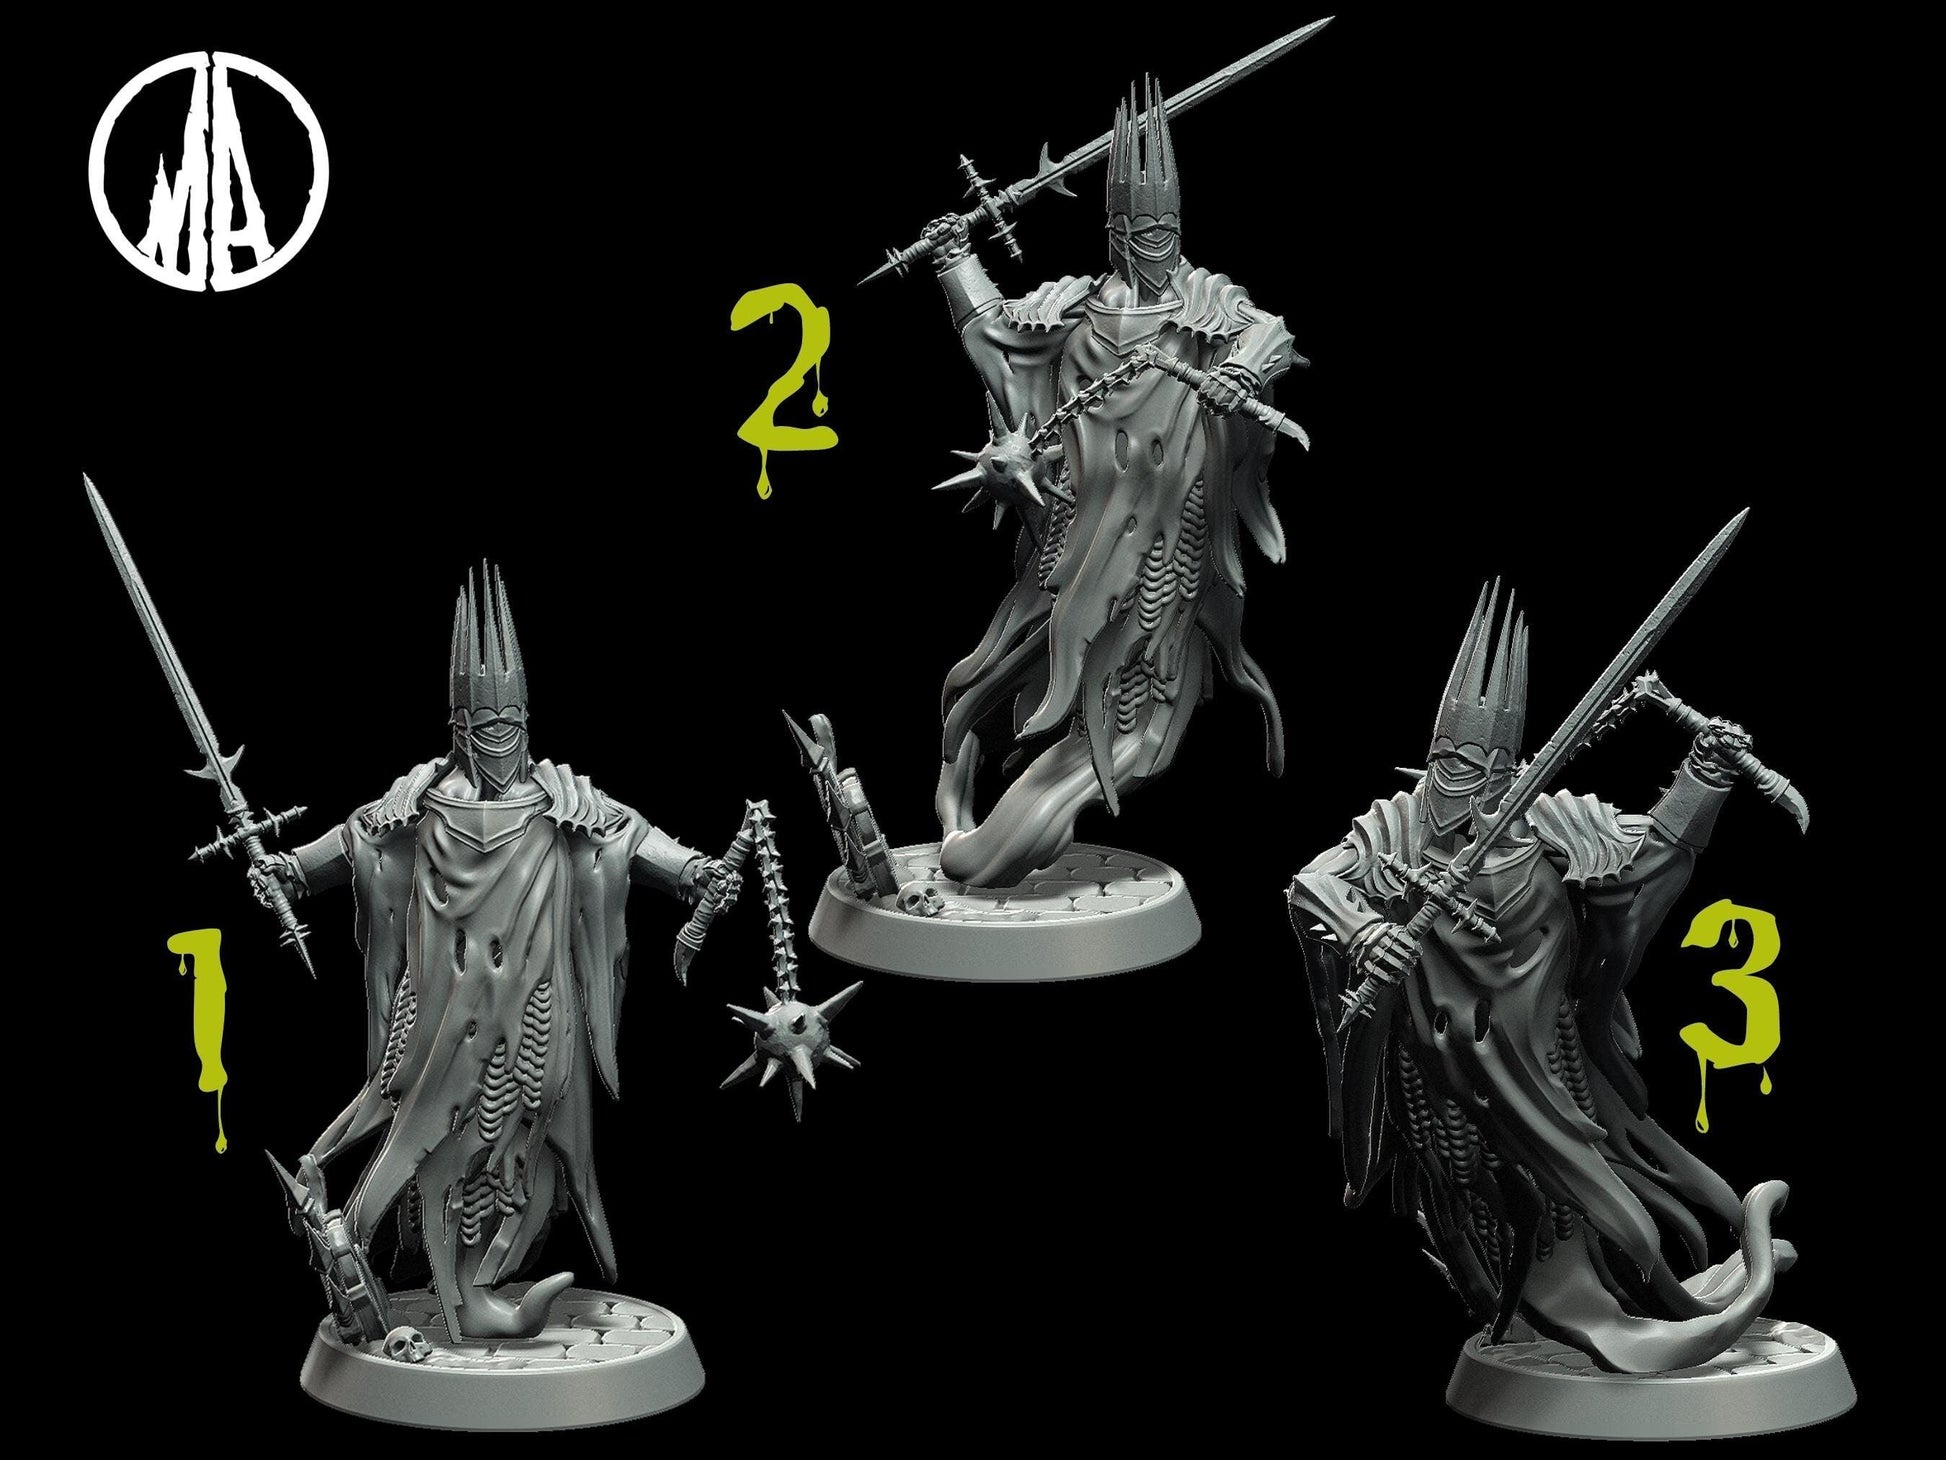 Wraith King Miniature - 3 Poses - 28mm scale Tabletop gaming DnD Miniature Dungeons and Dragons,ttrpg dnd 5e - Plague Miniatures shop for DnD Miniatures